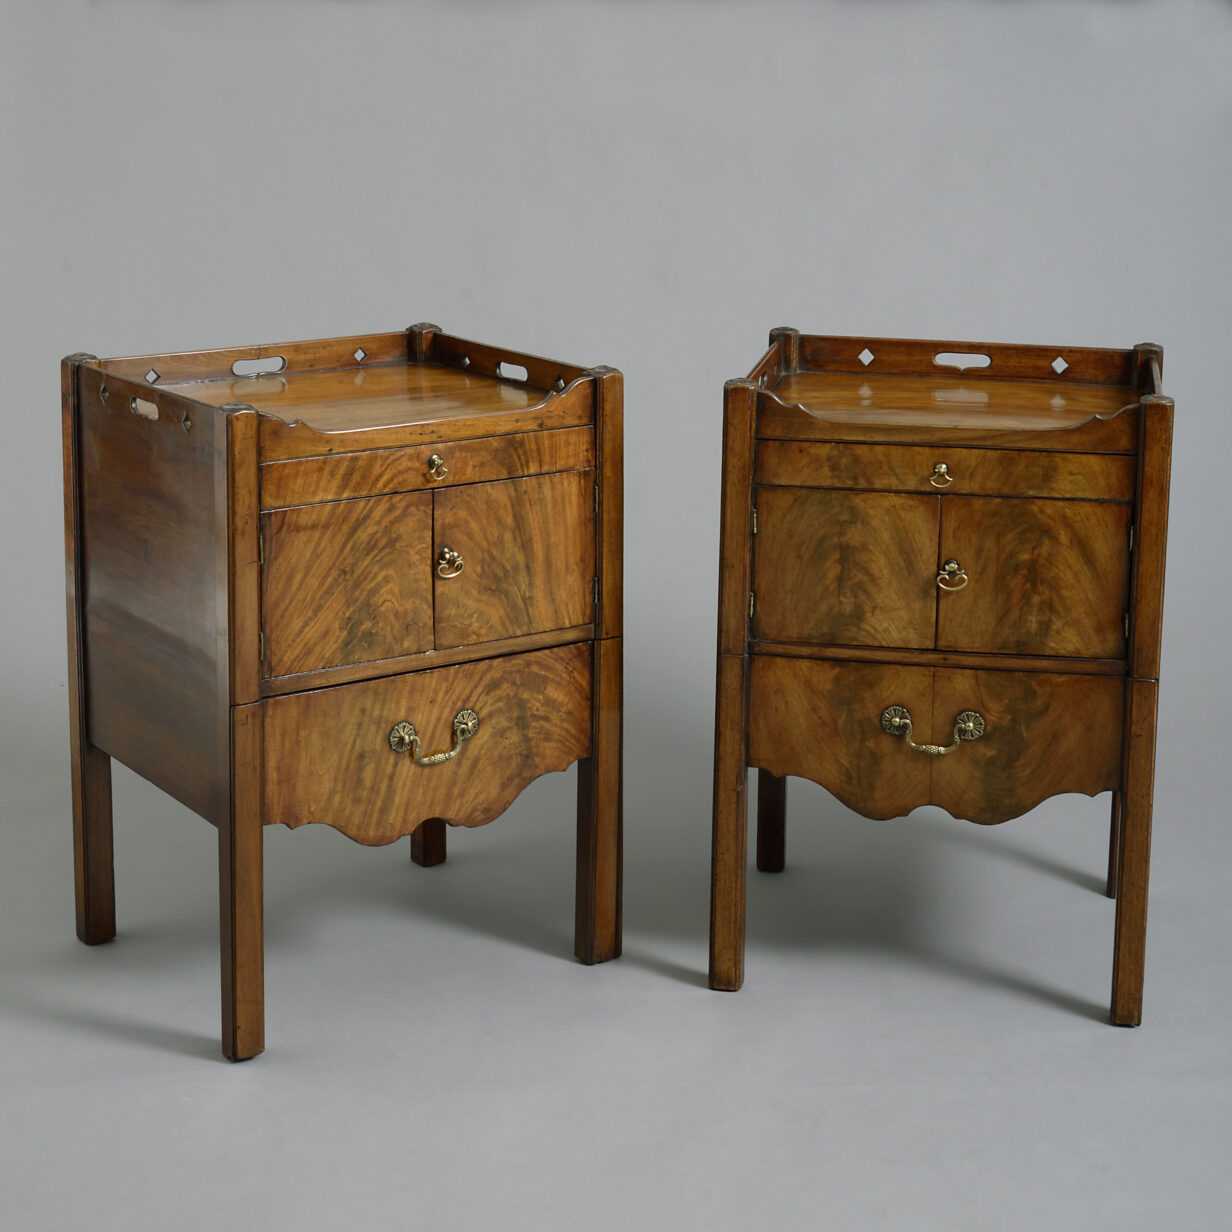 Pair of george iii period commode